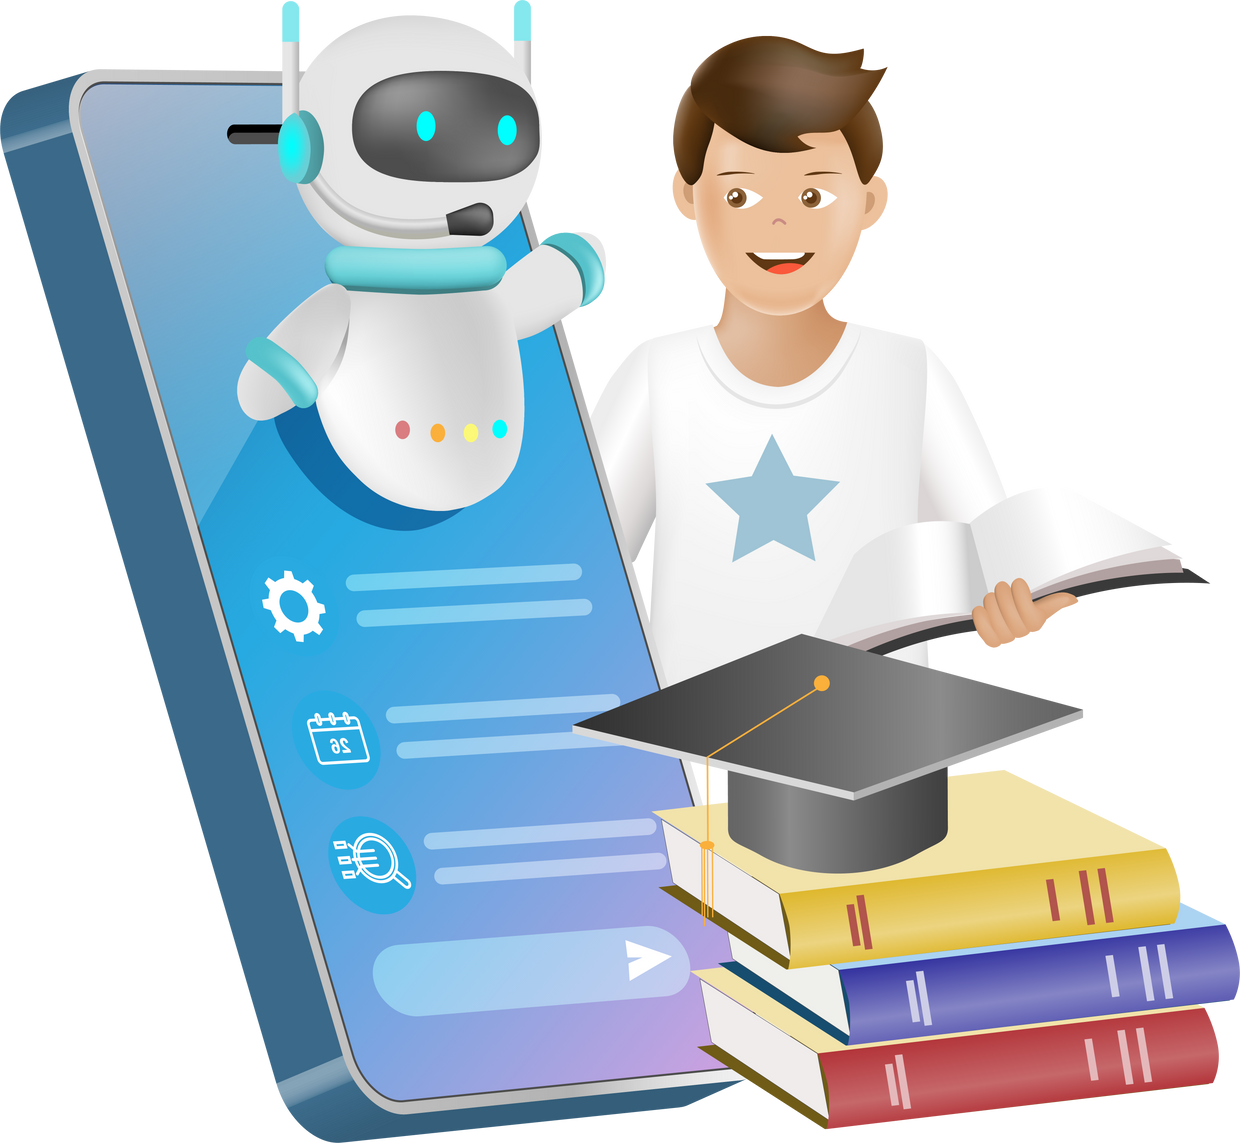 AI chat bot on smartphone assist kid student doing homework assignment. Artificial intelligence robot generates information and summarize knowledge to accomplish tasks in smart solution. Education Technology.